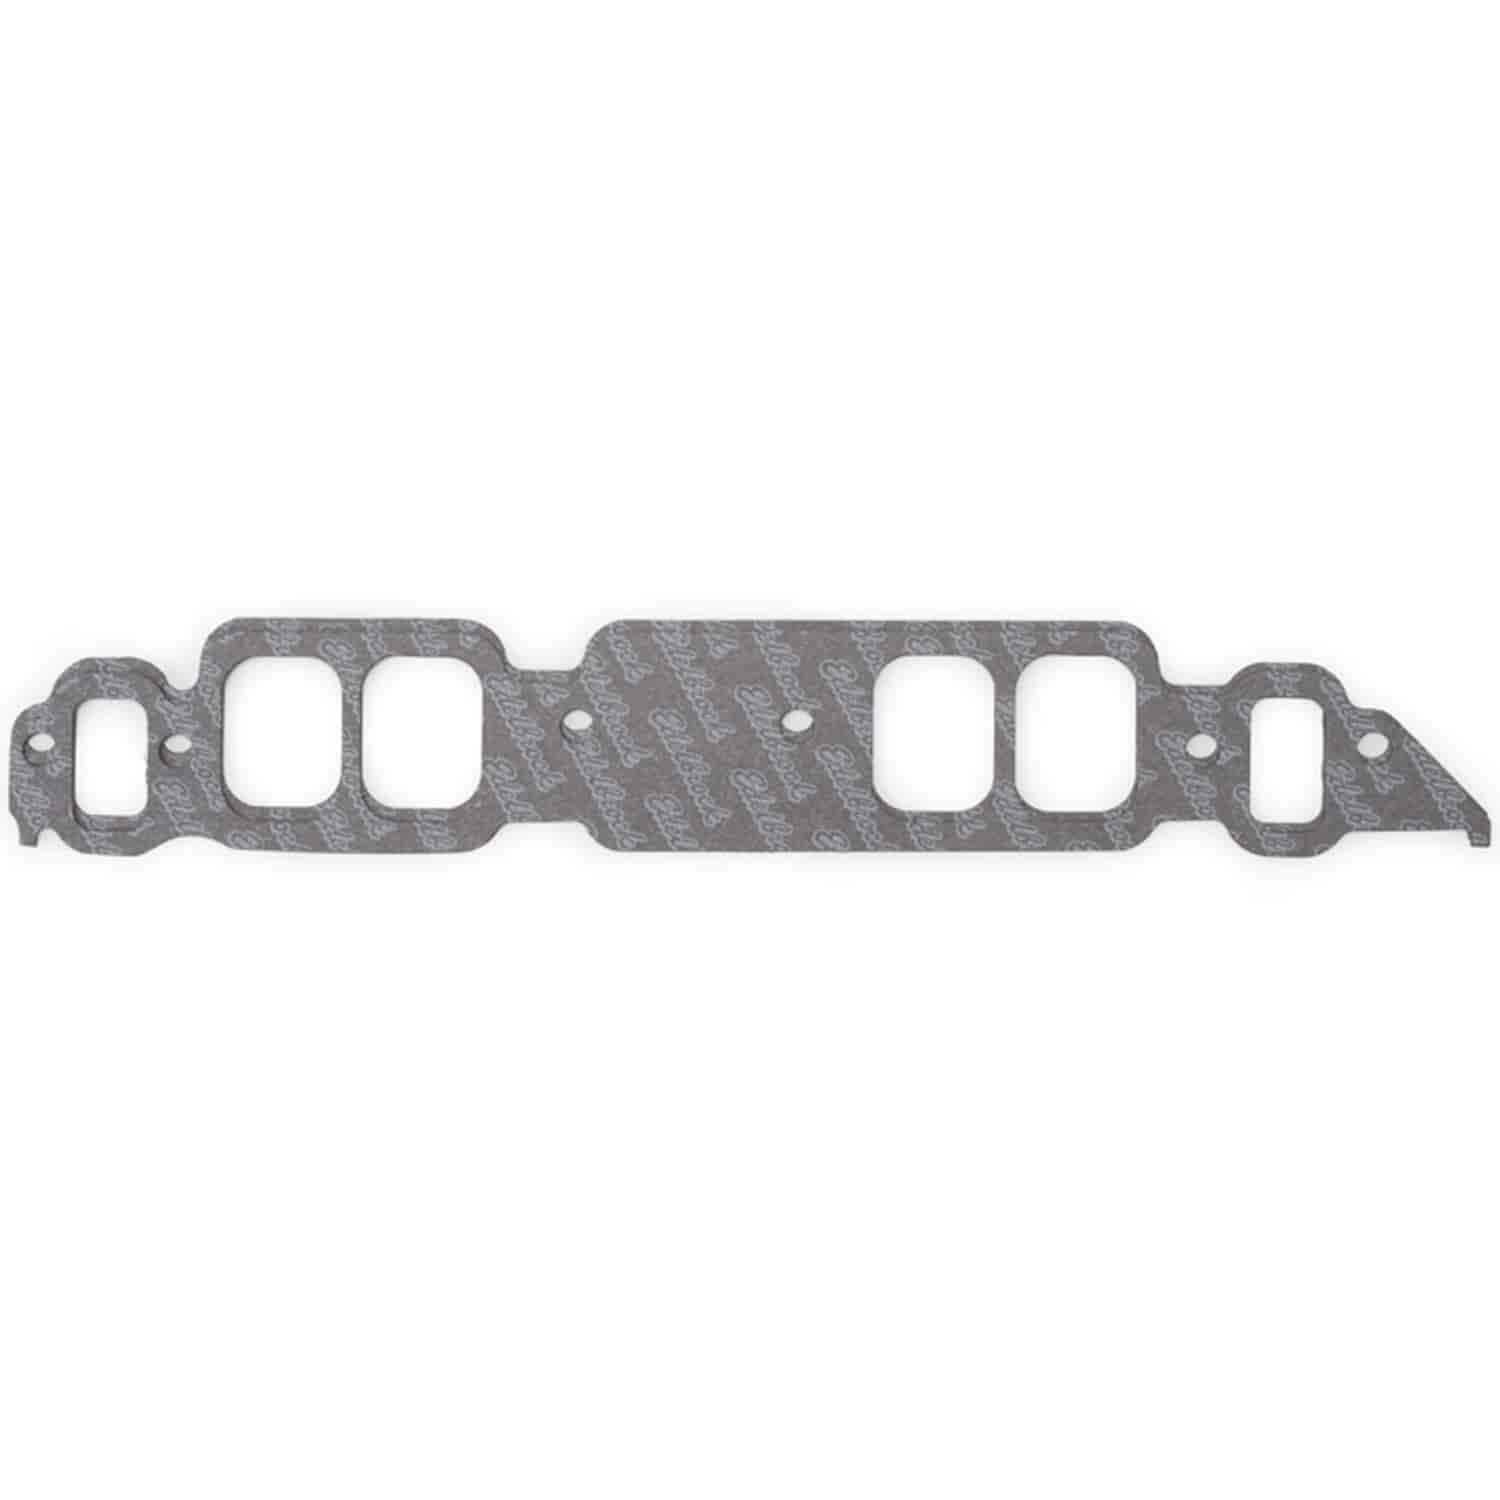 Intake Gaskets for Rectangle Port Big Block Chevy